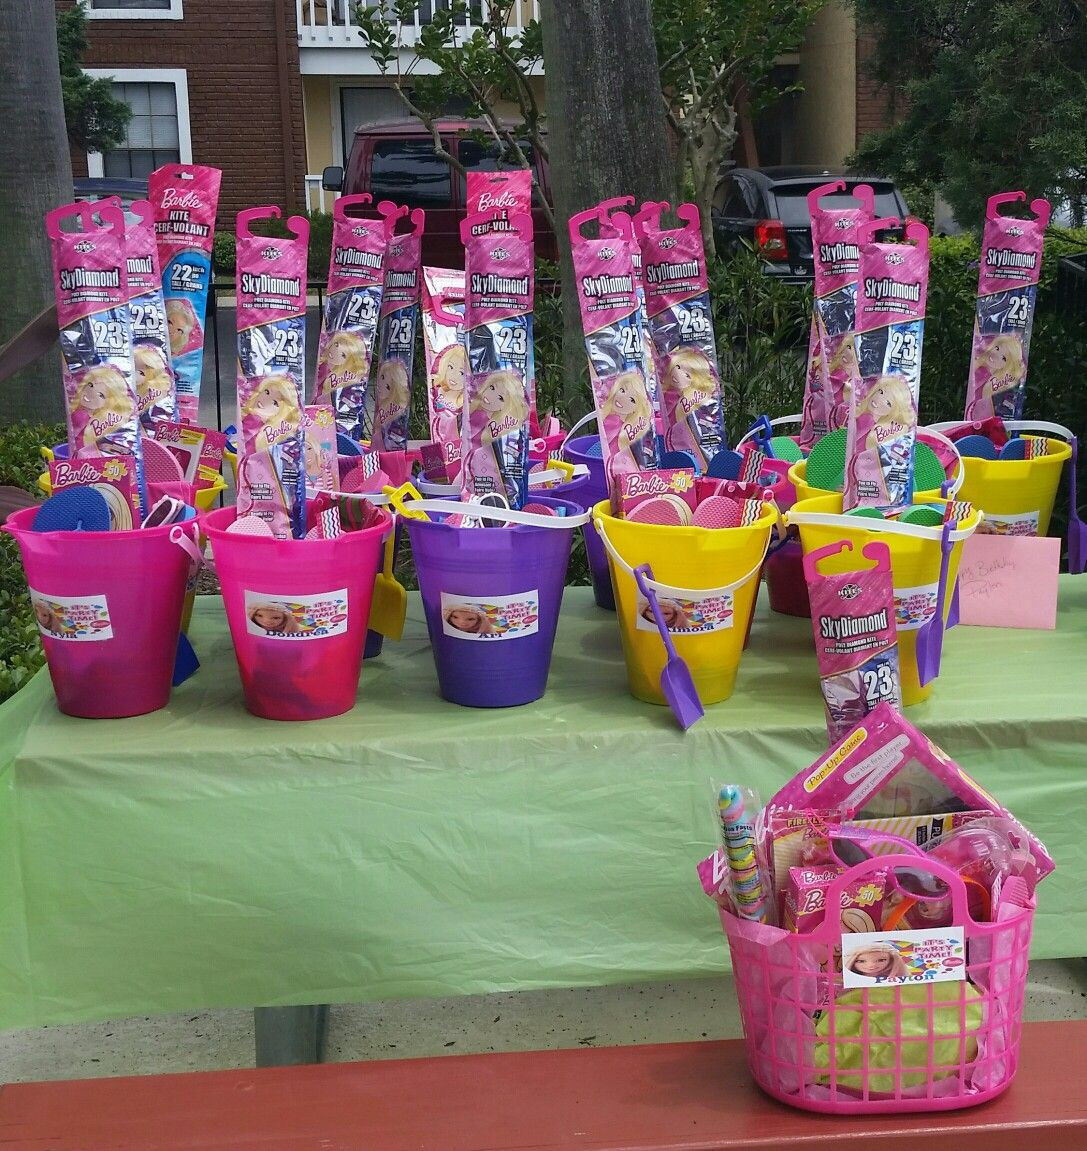 Pool Party Craft Ideas
 Barbie Pool Party Favors Idea